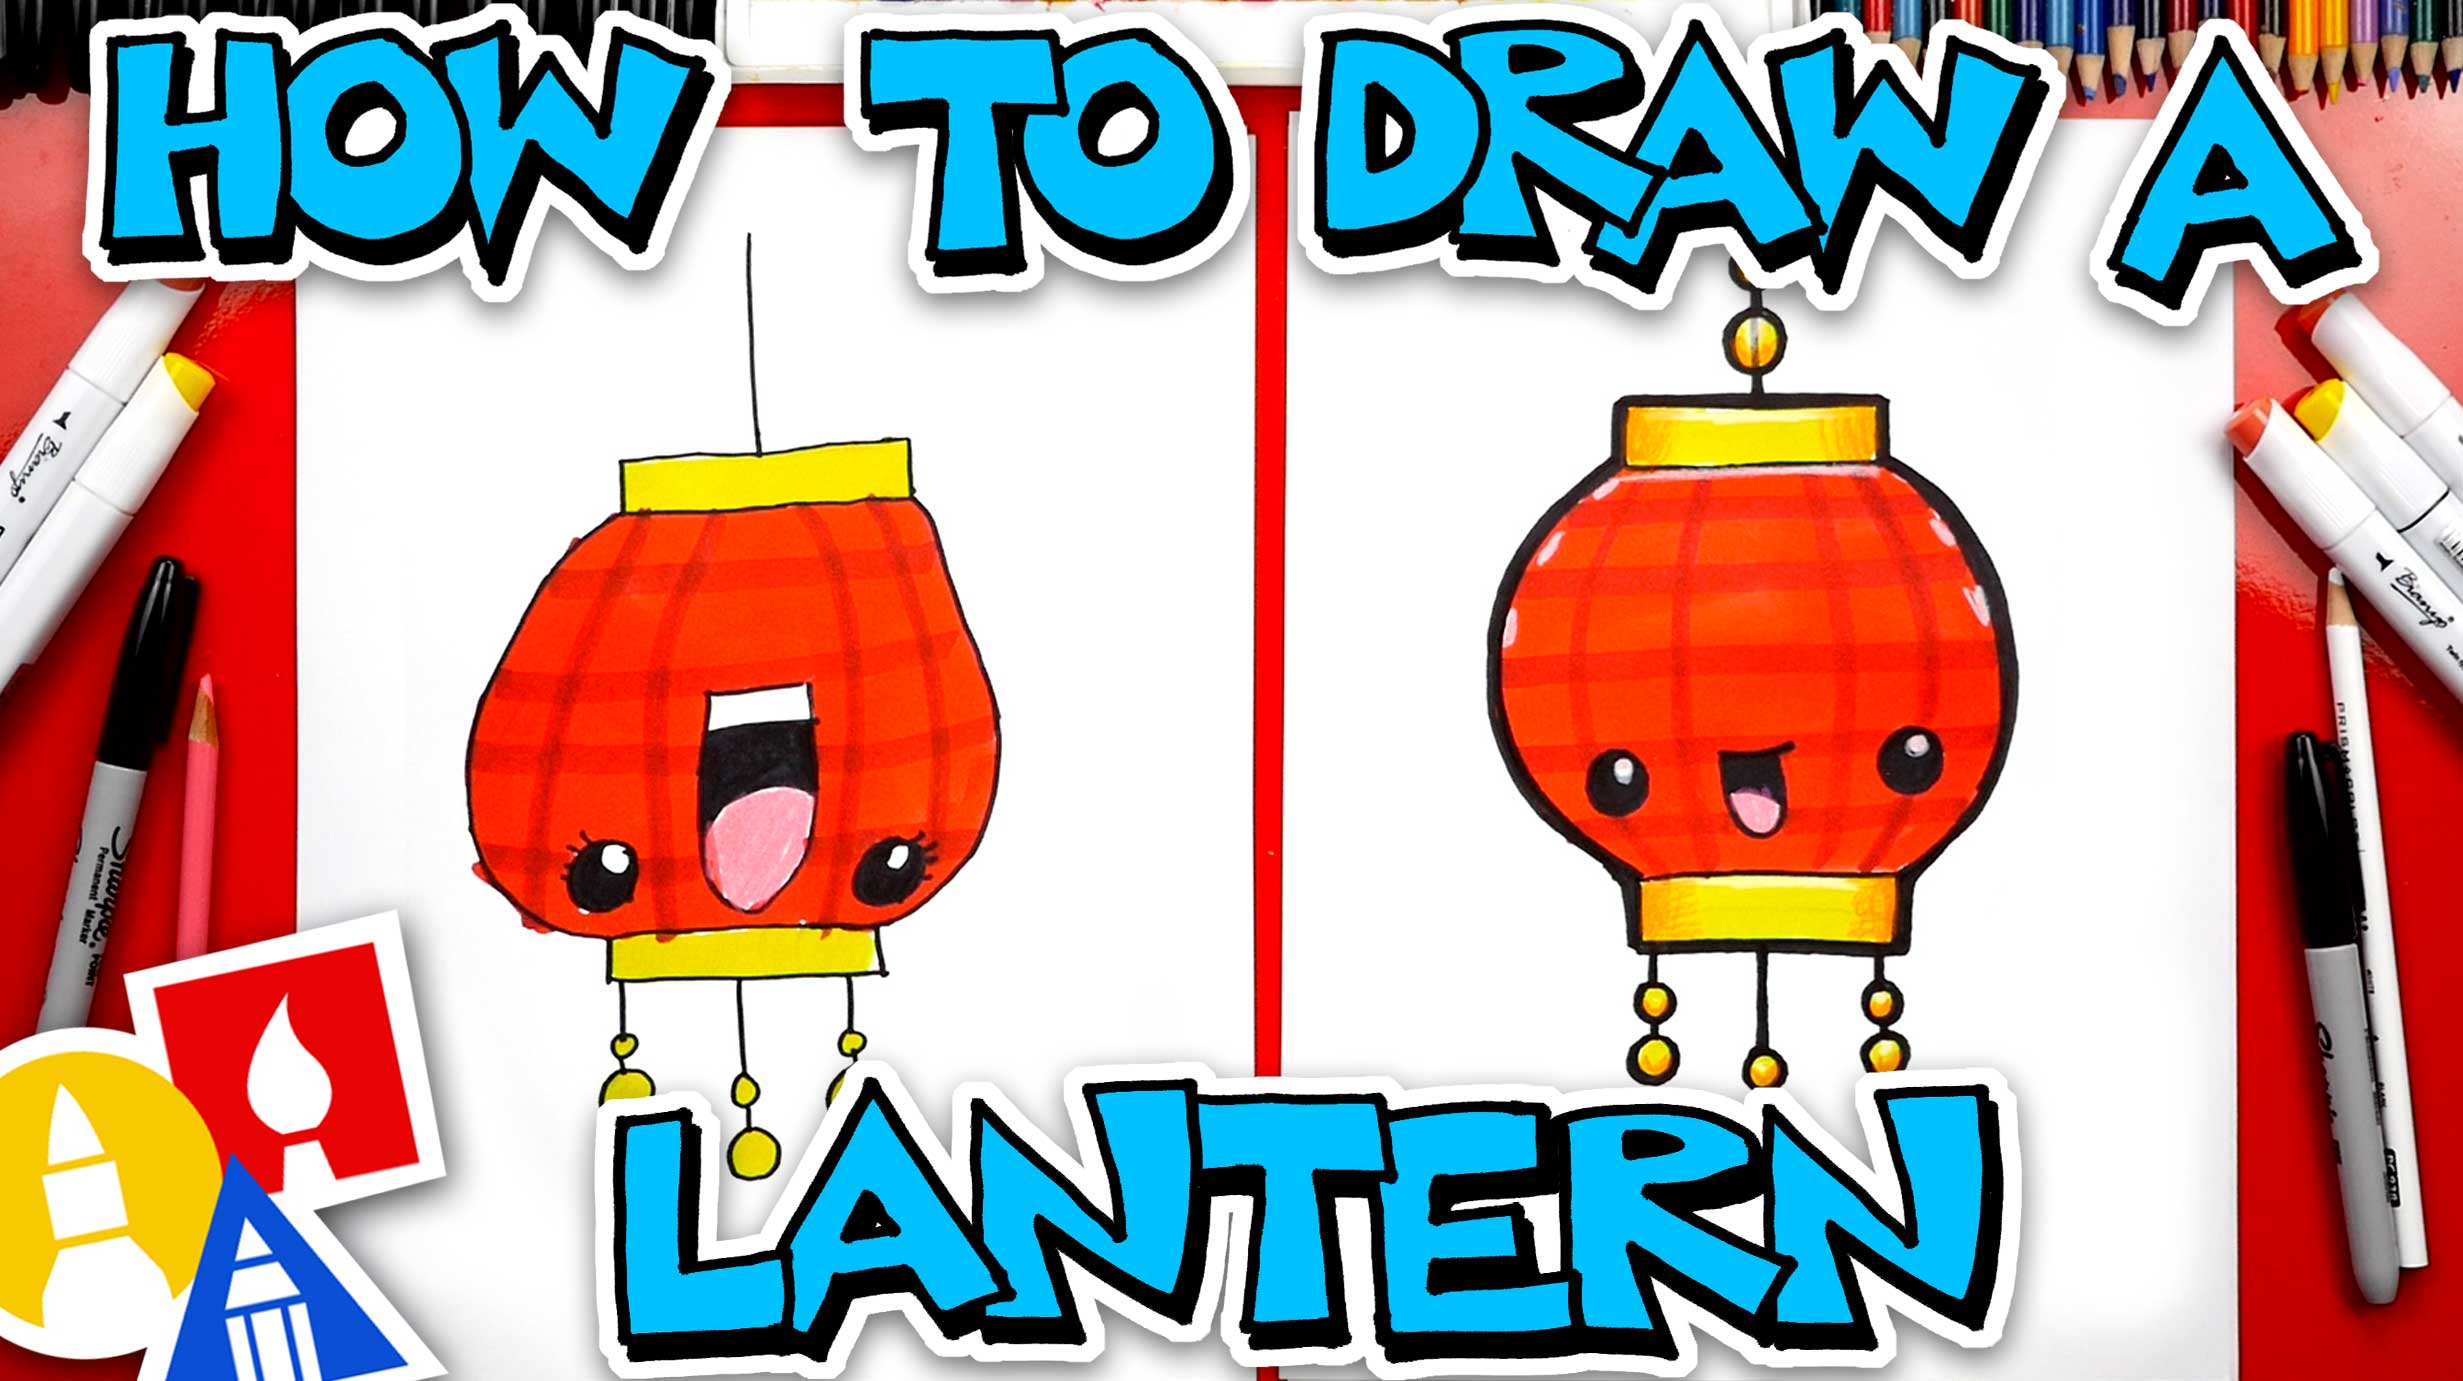 How To Draw A Chinese Lantern